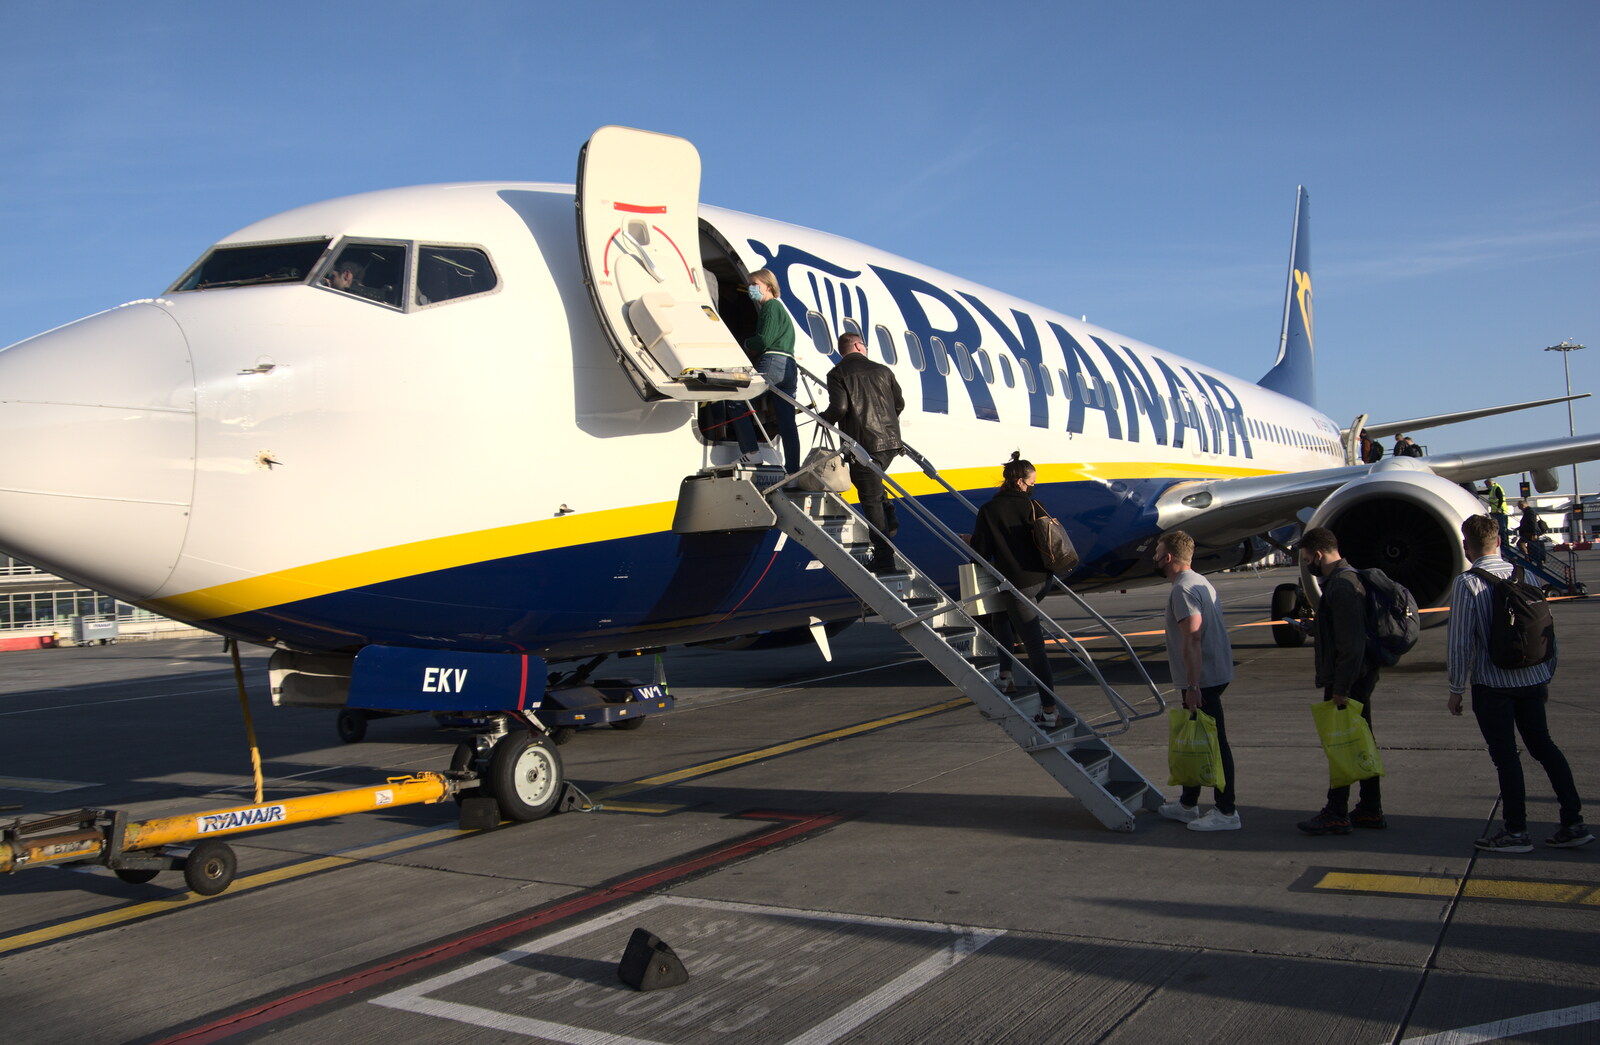 Blackrock North and South, Louth and County Dublin, Ireland - 23rd April 2022: Our plane loads up